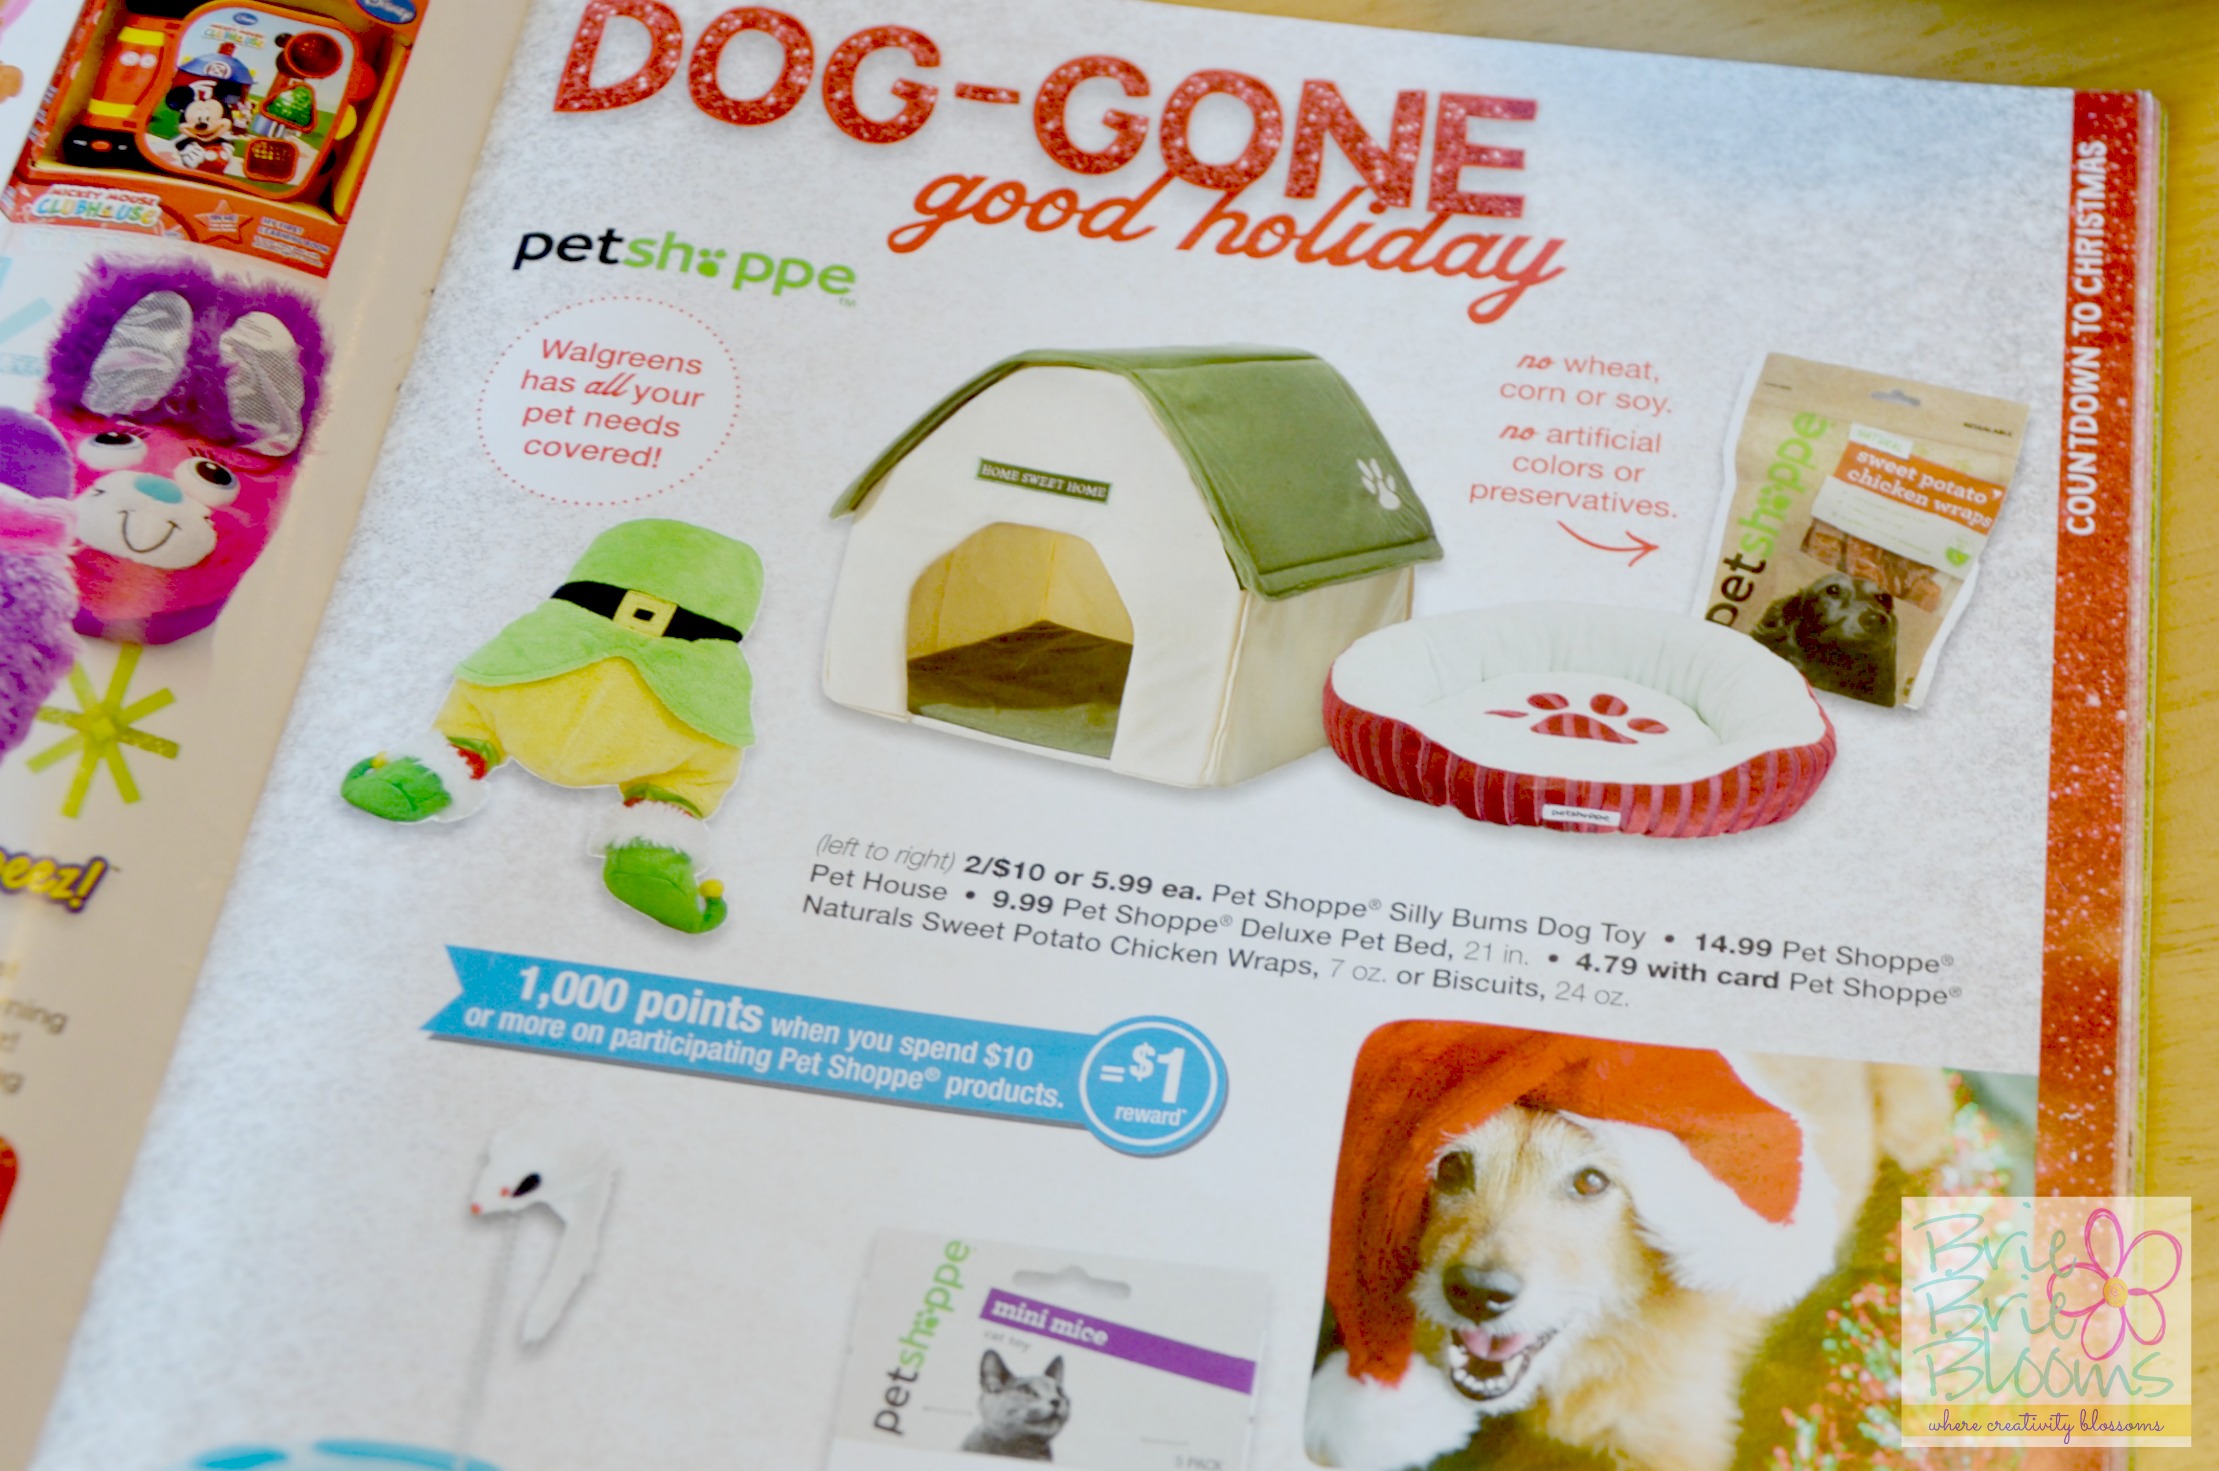 Pet gifts in Walgreens holiday gift guide #HappyAllTheWay #shop #cbias